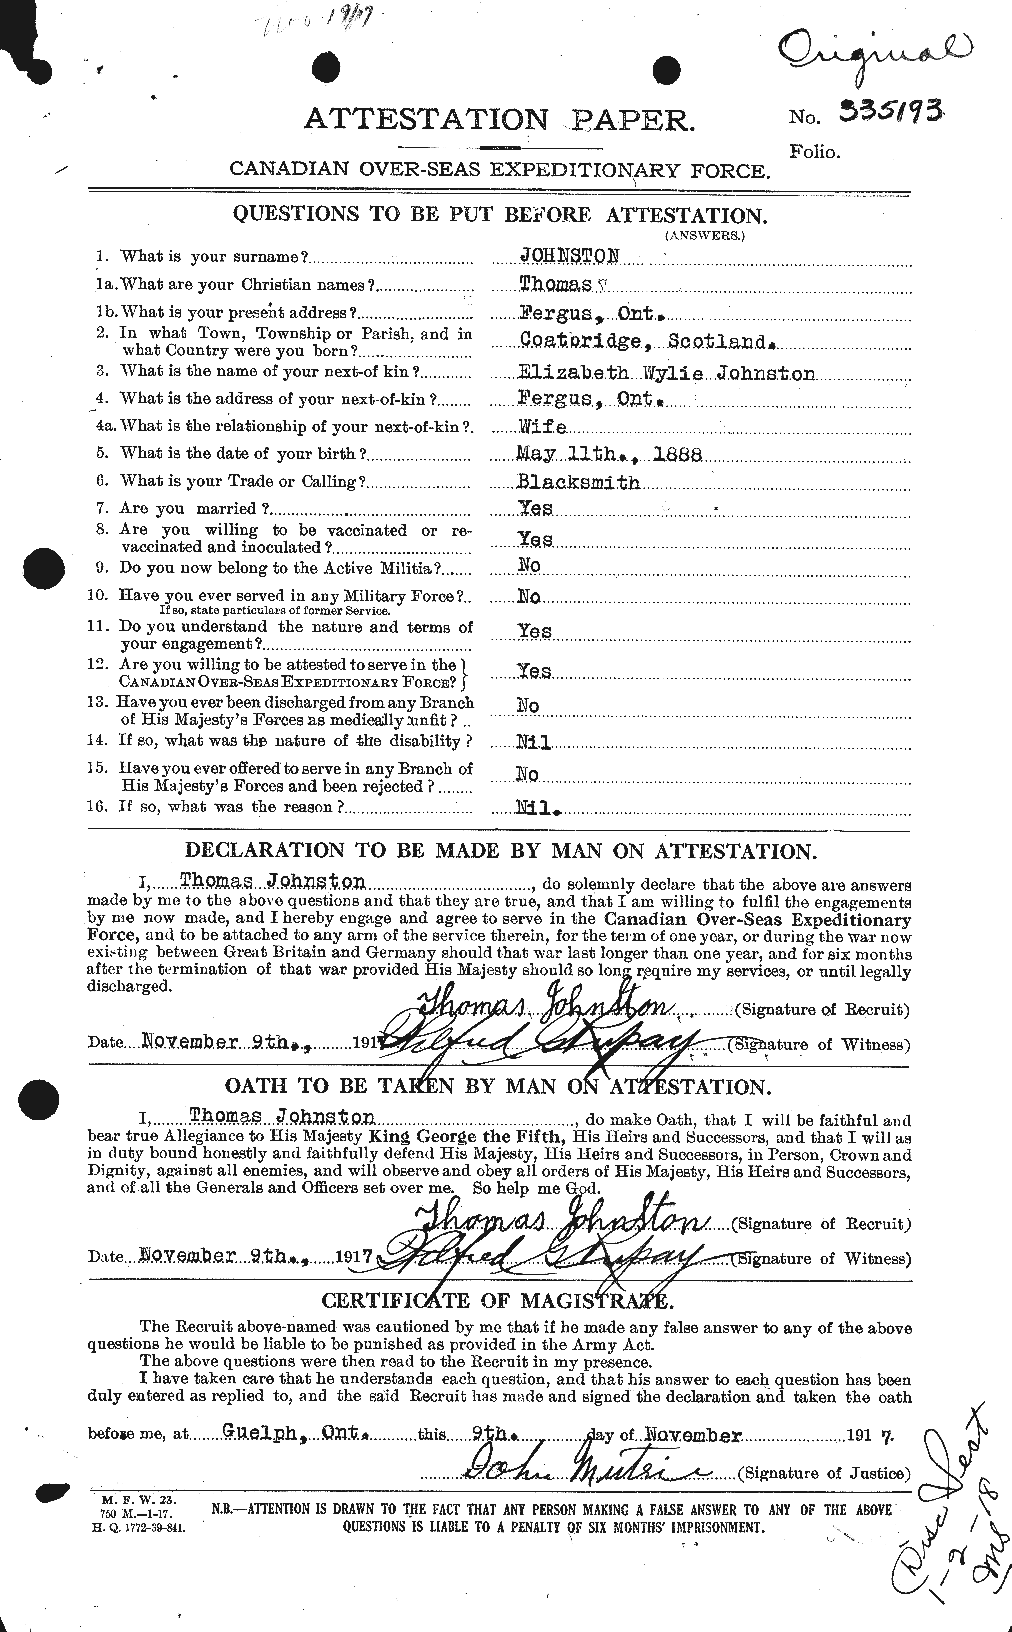 Personnel Records of the First World War - CEF 427146a